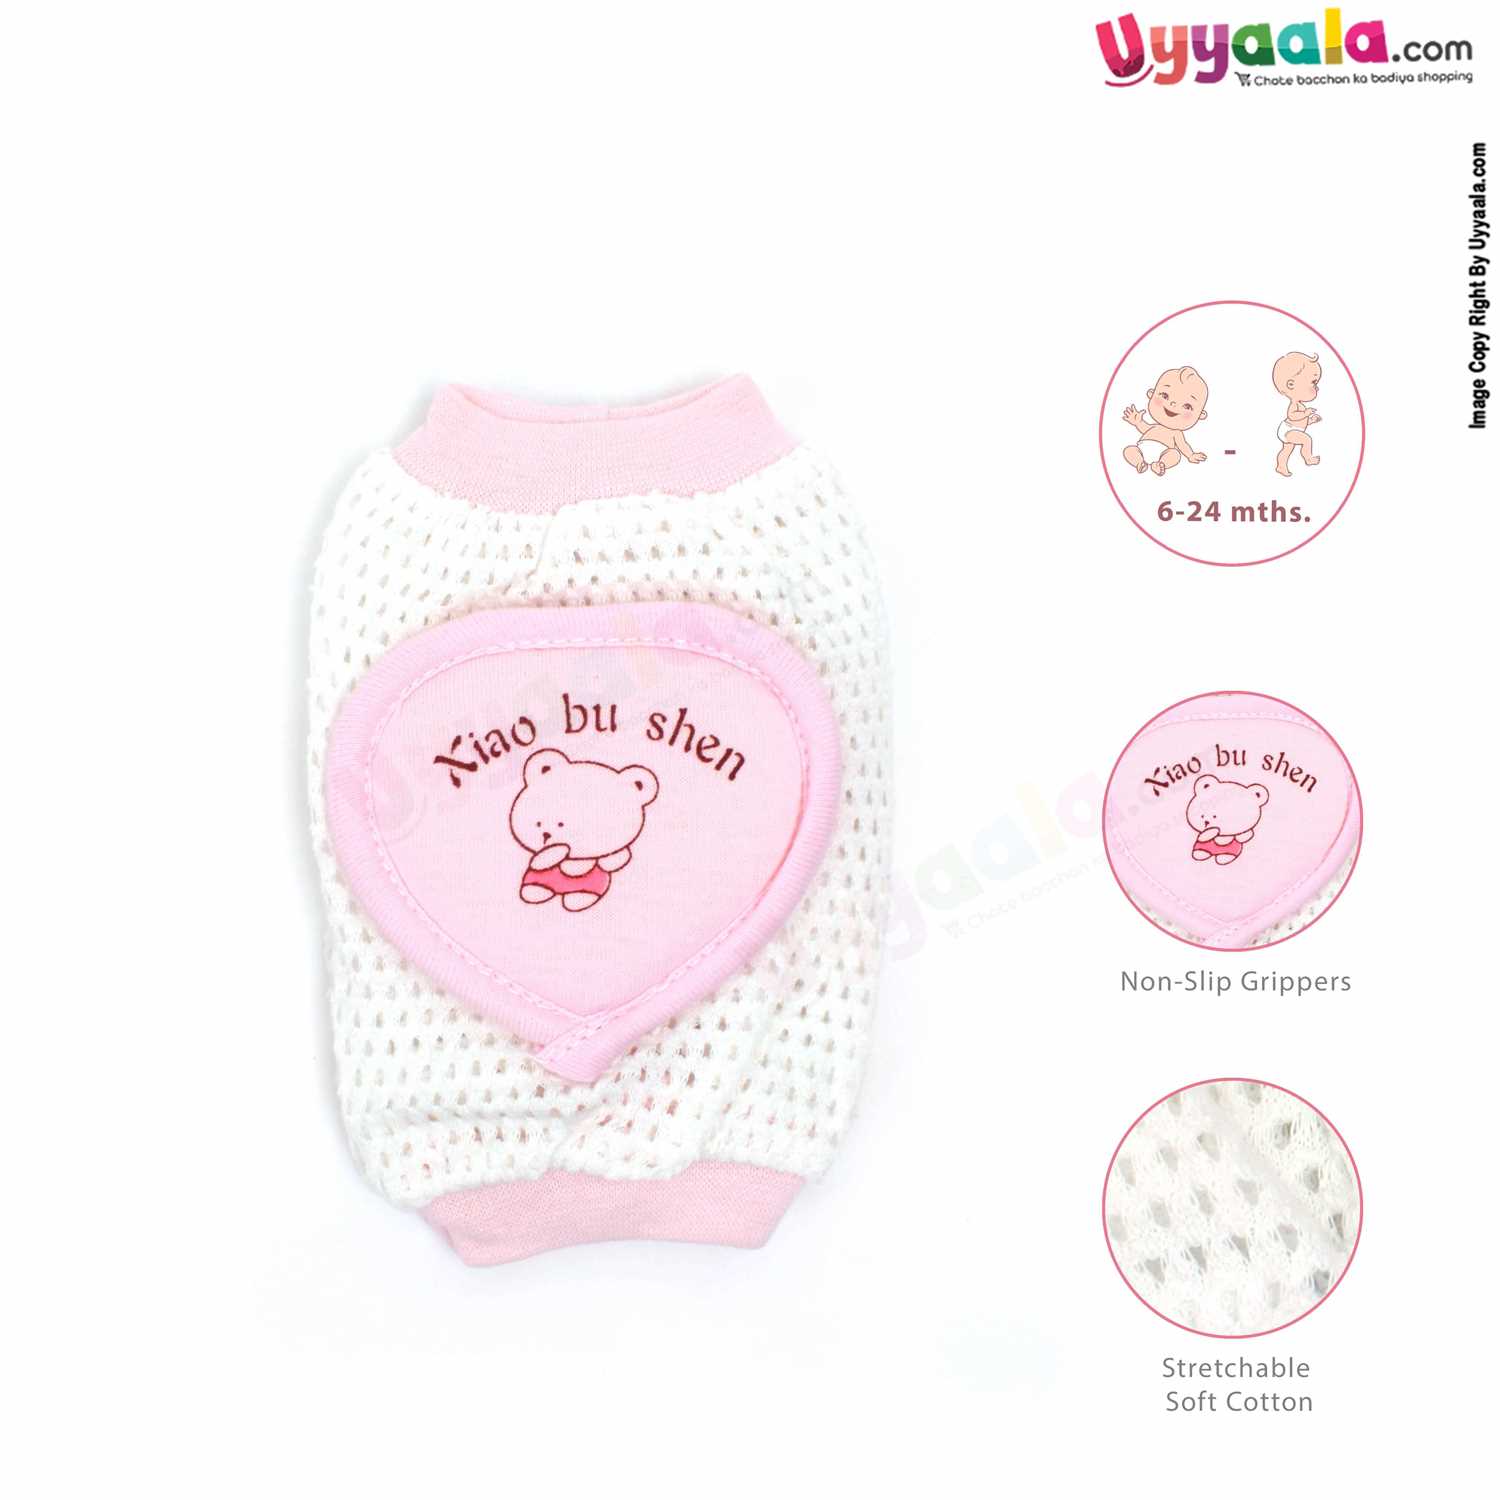 Cotton Stretchable Knee Protection Pads for Crawling Babies with Heart Shape Patch Teddy Bear Print Pack of 1 Pair , 6m-2Y Age - White & Light Pink